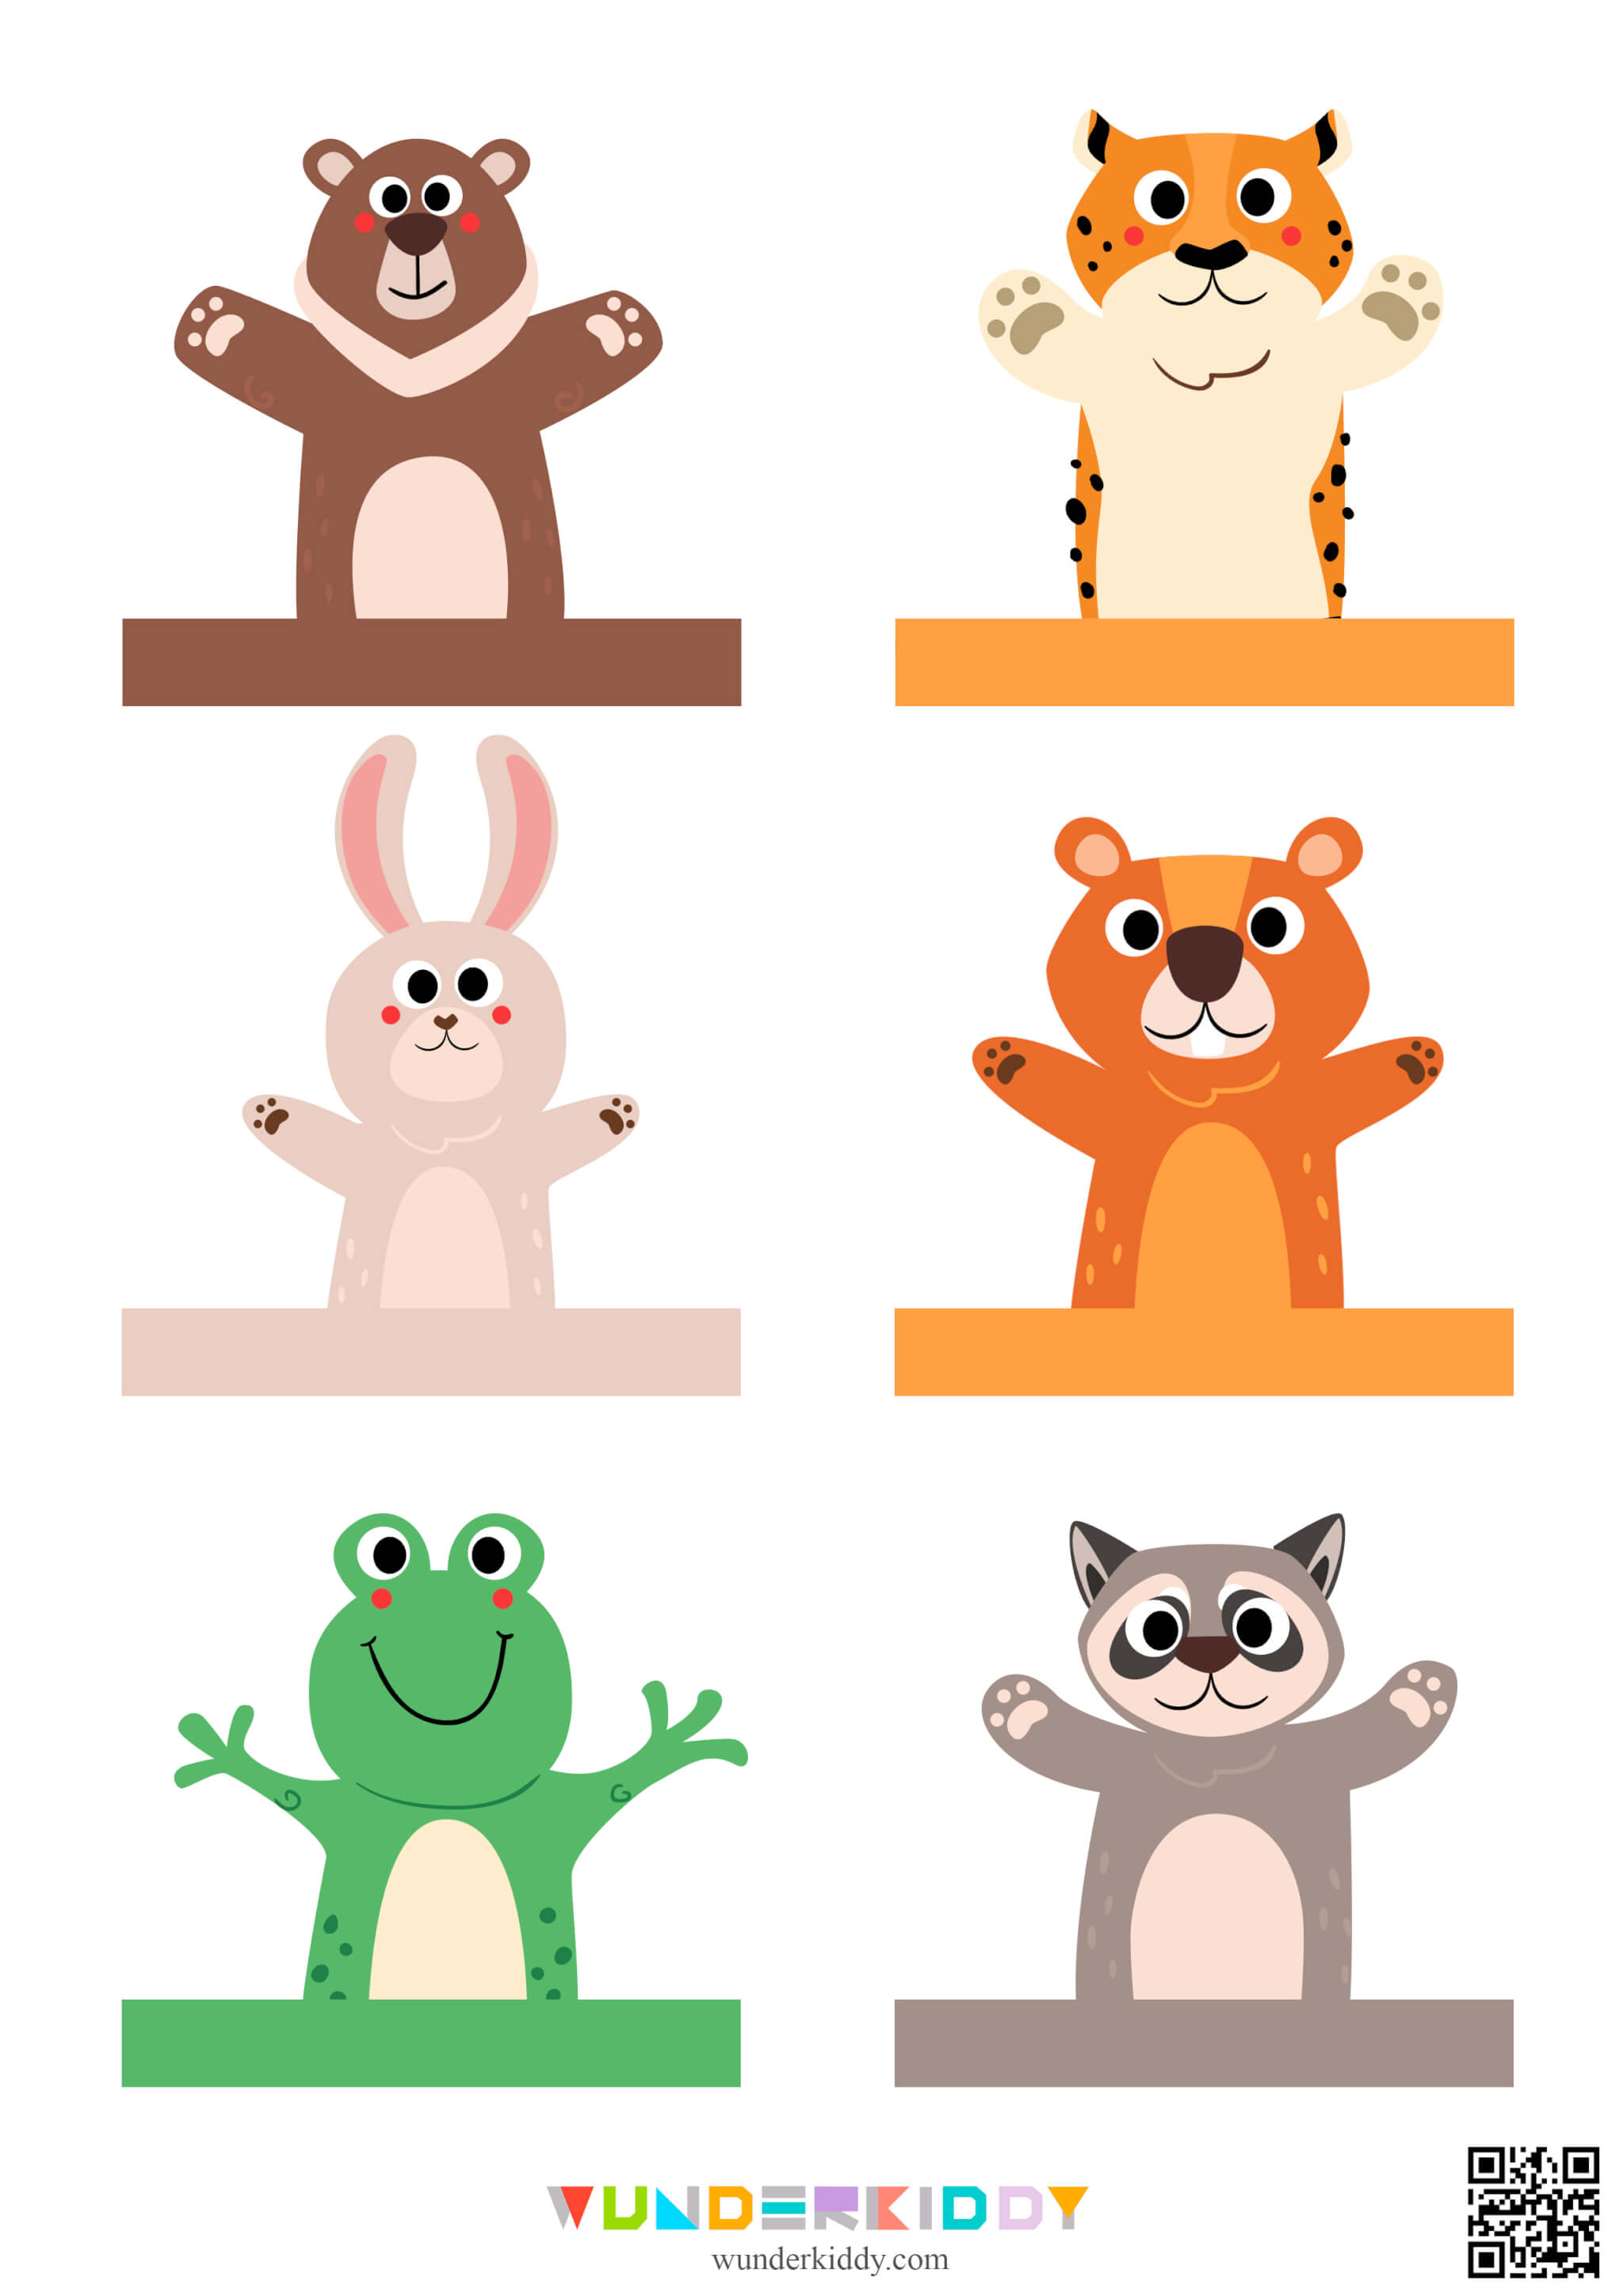 Templates of Animal Finger Puppets for Toddlers - Image 2